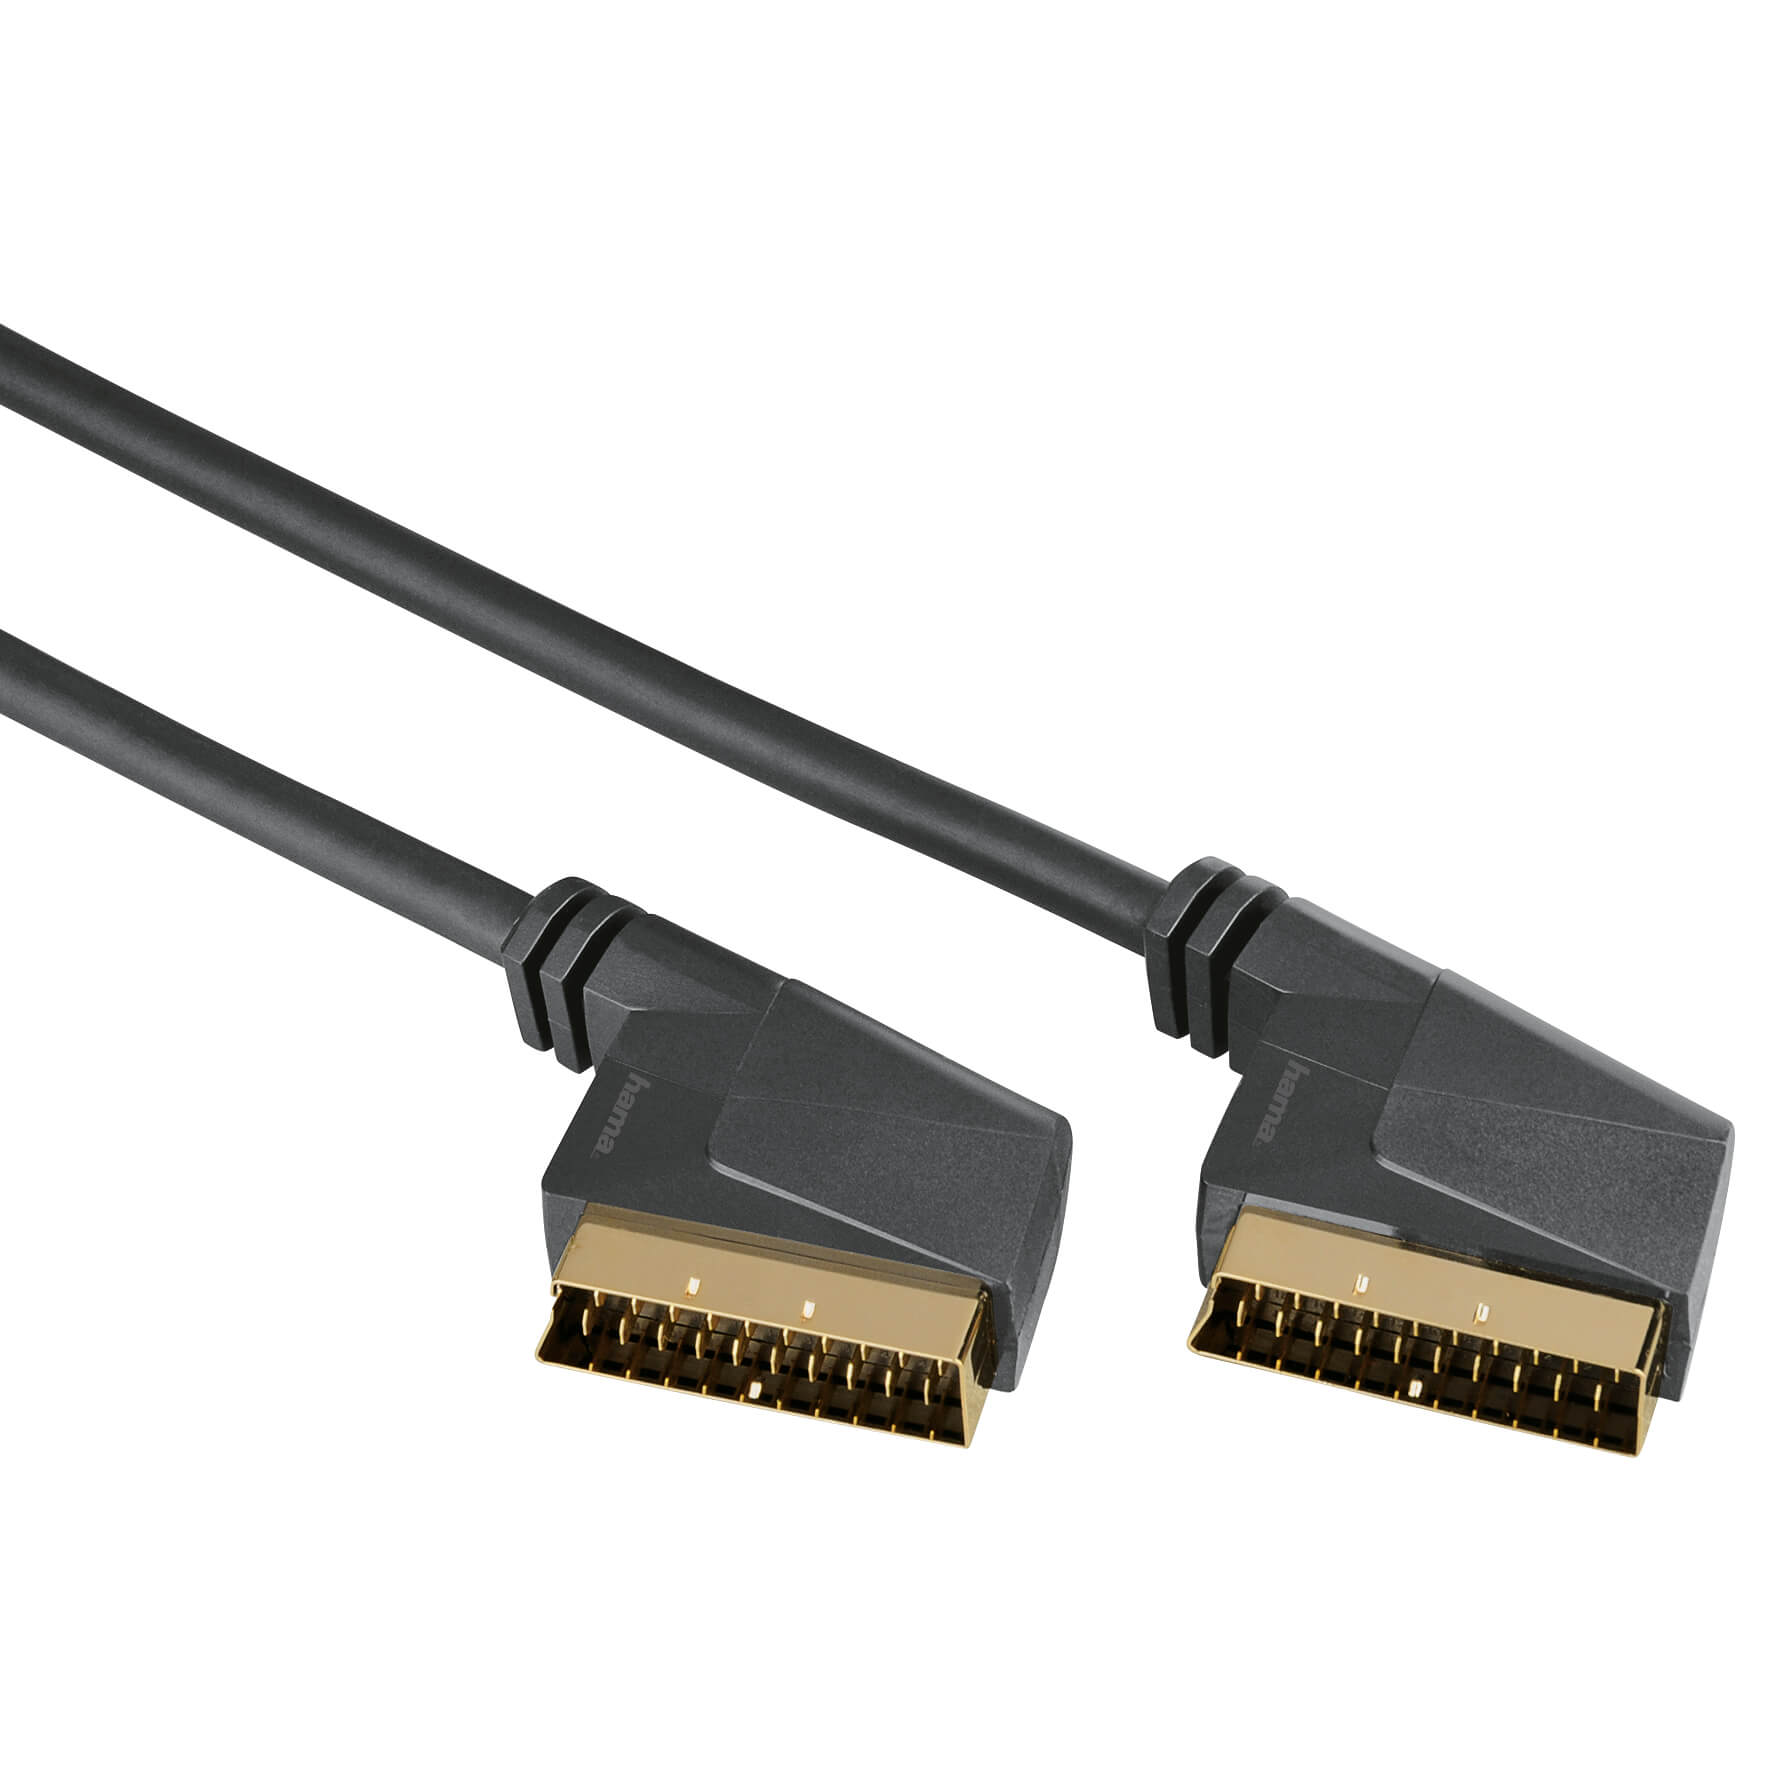 Scart Connecting Cable, plug - plug, 1.5 m